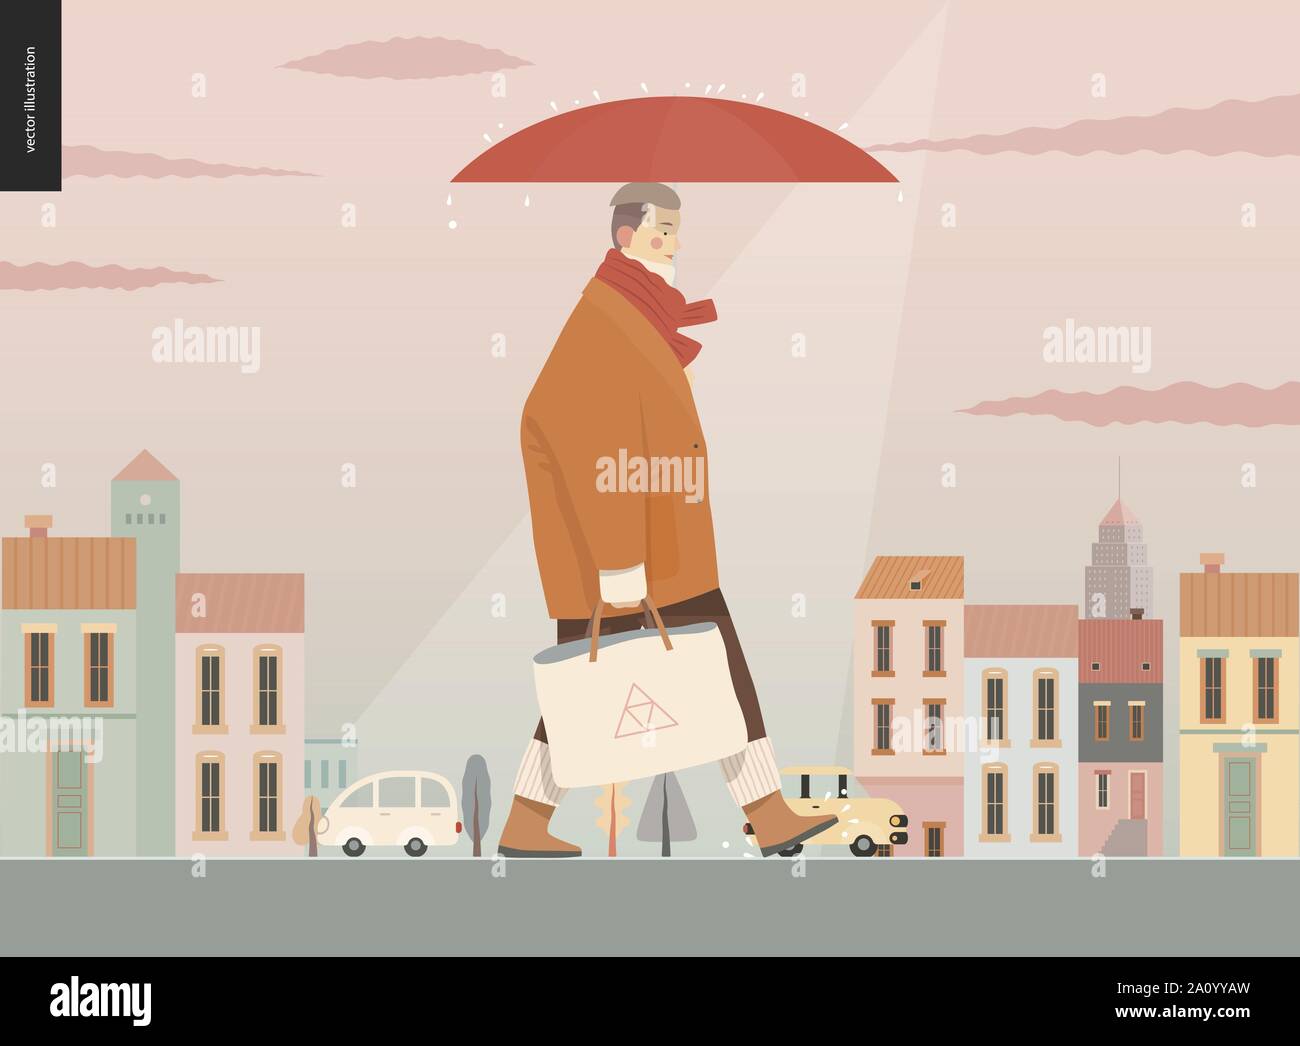 Rain -walking woman -modern flat vector concept illustration of adult woman wearing big coat and scarf, with umbrella and tote bag, standing in the ra Stock Vector